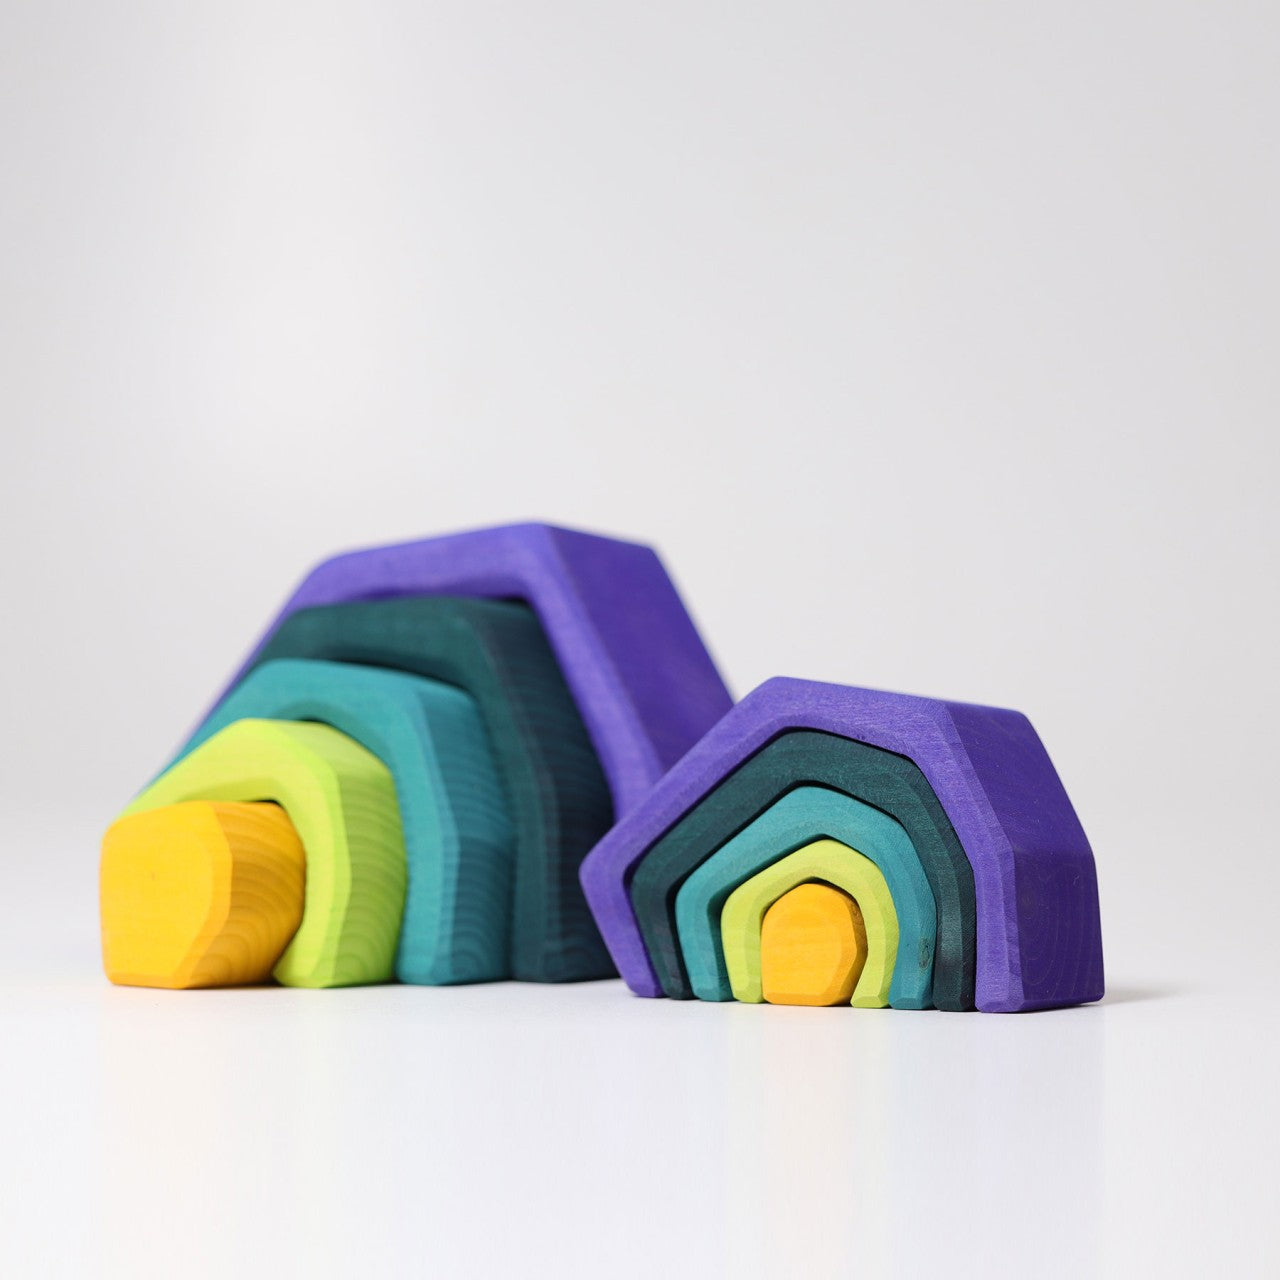 Small Earth | 5 Pieces | Wooden Toys for Kids | Open-Ended Play